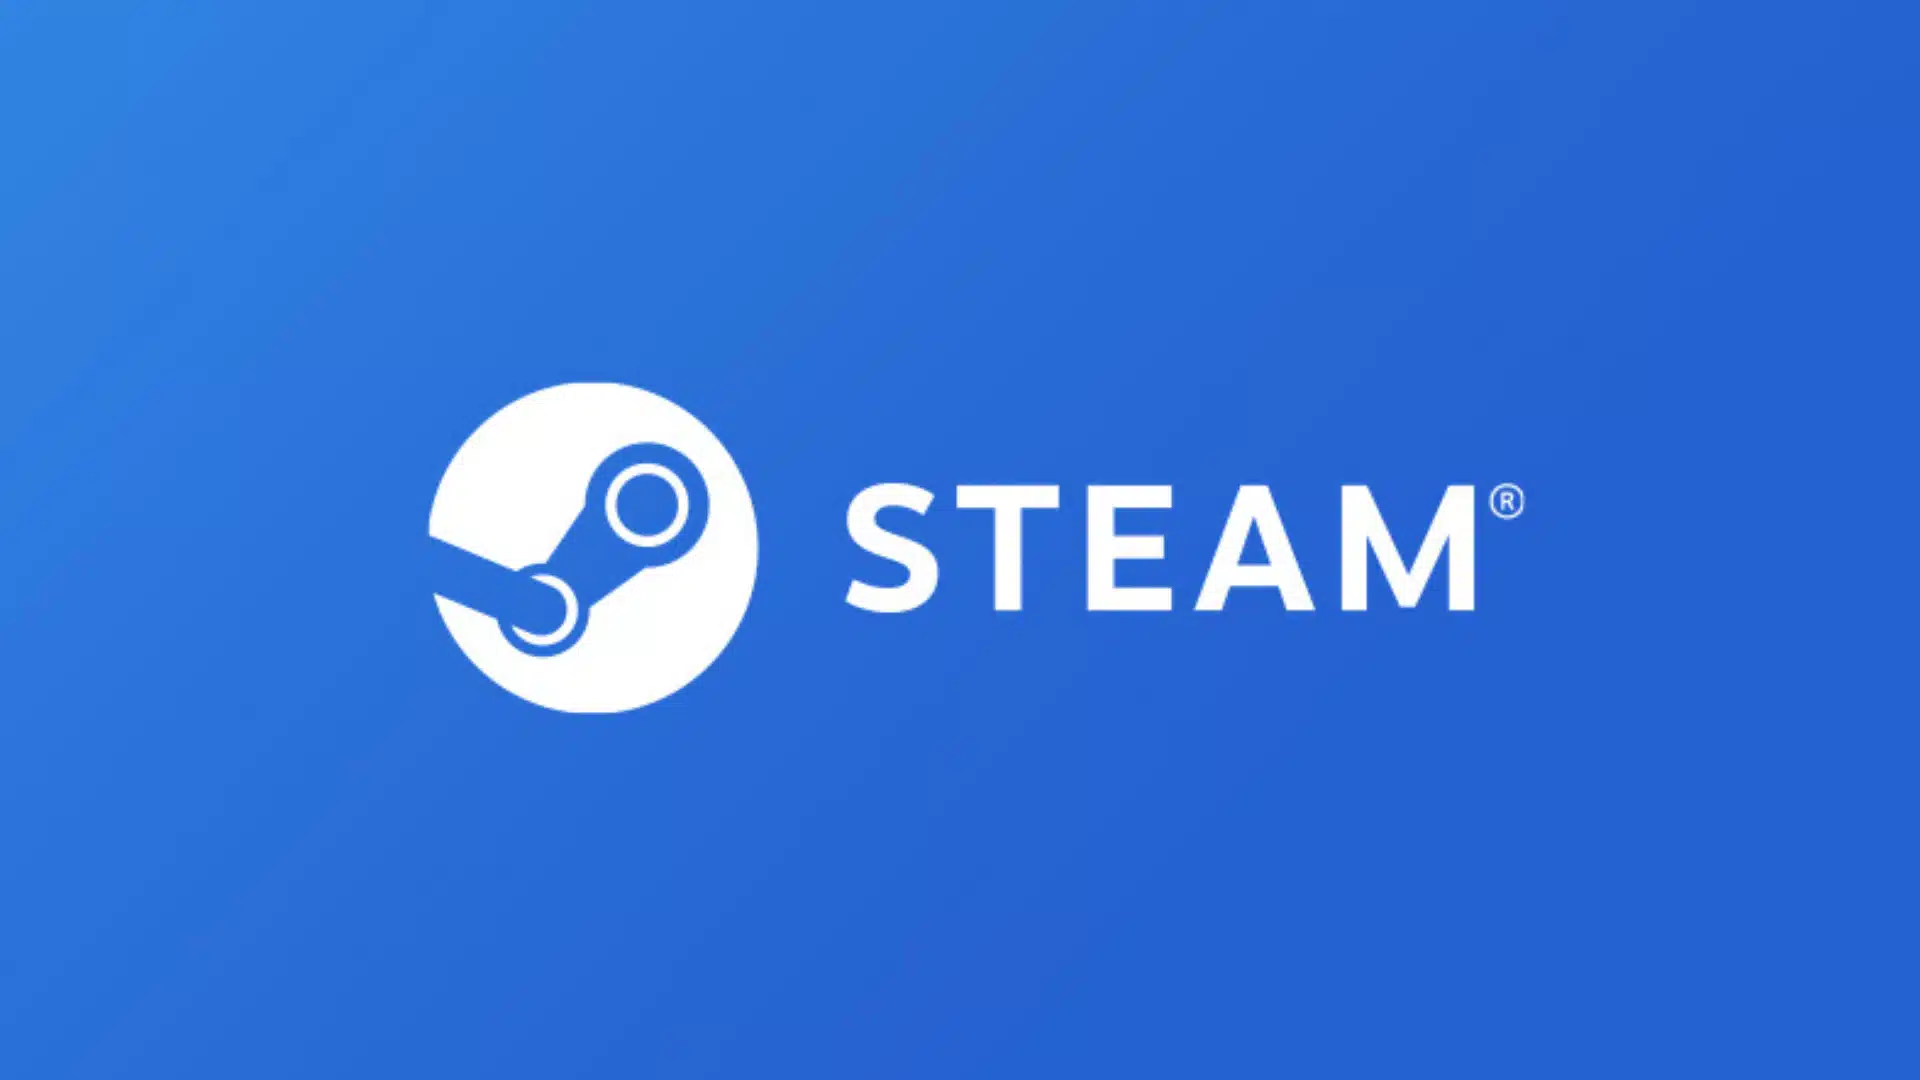 Steam Down and Experiencing Connectivity Issues This December 12